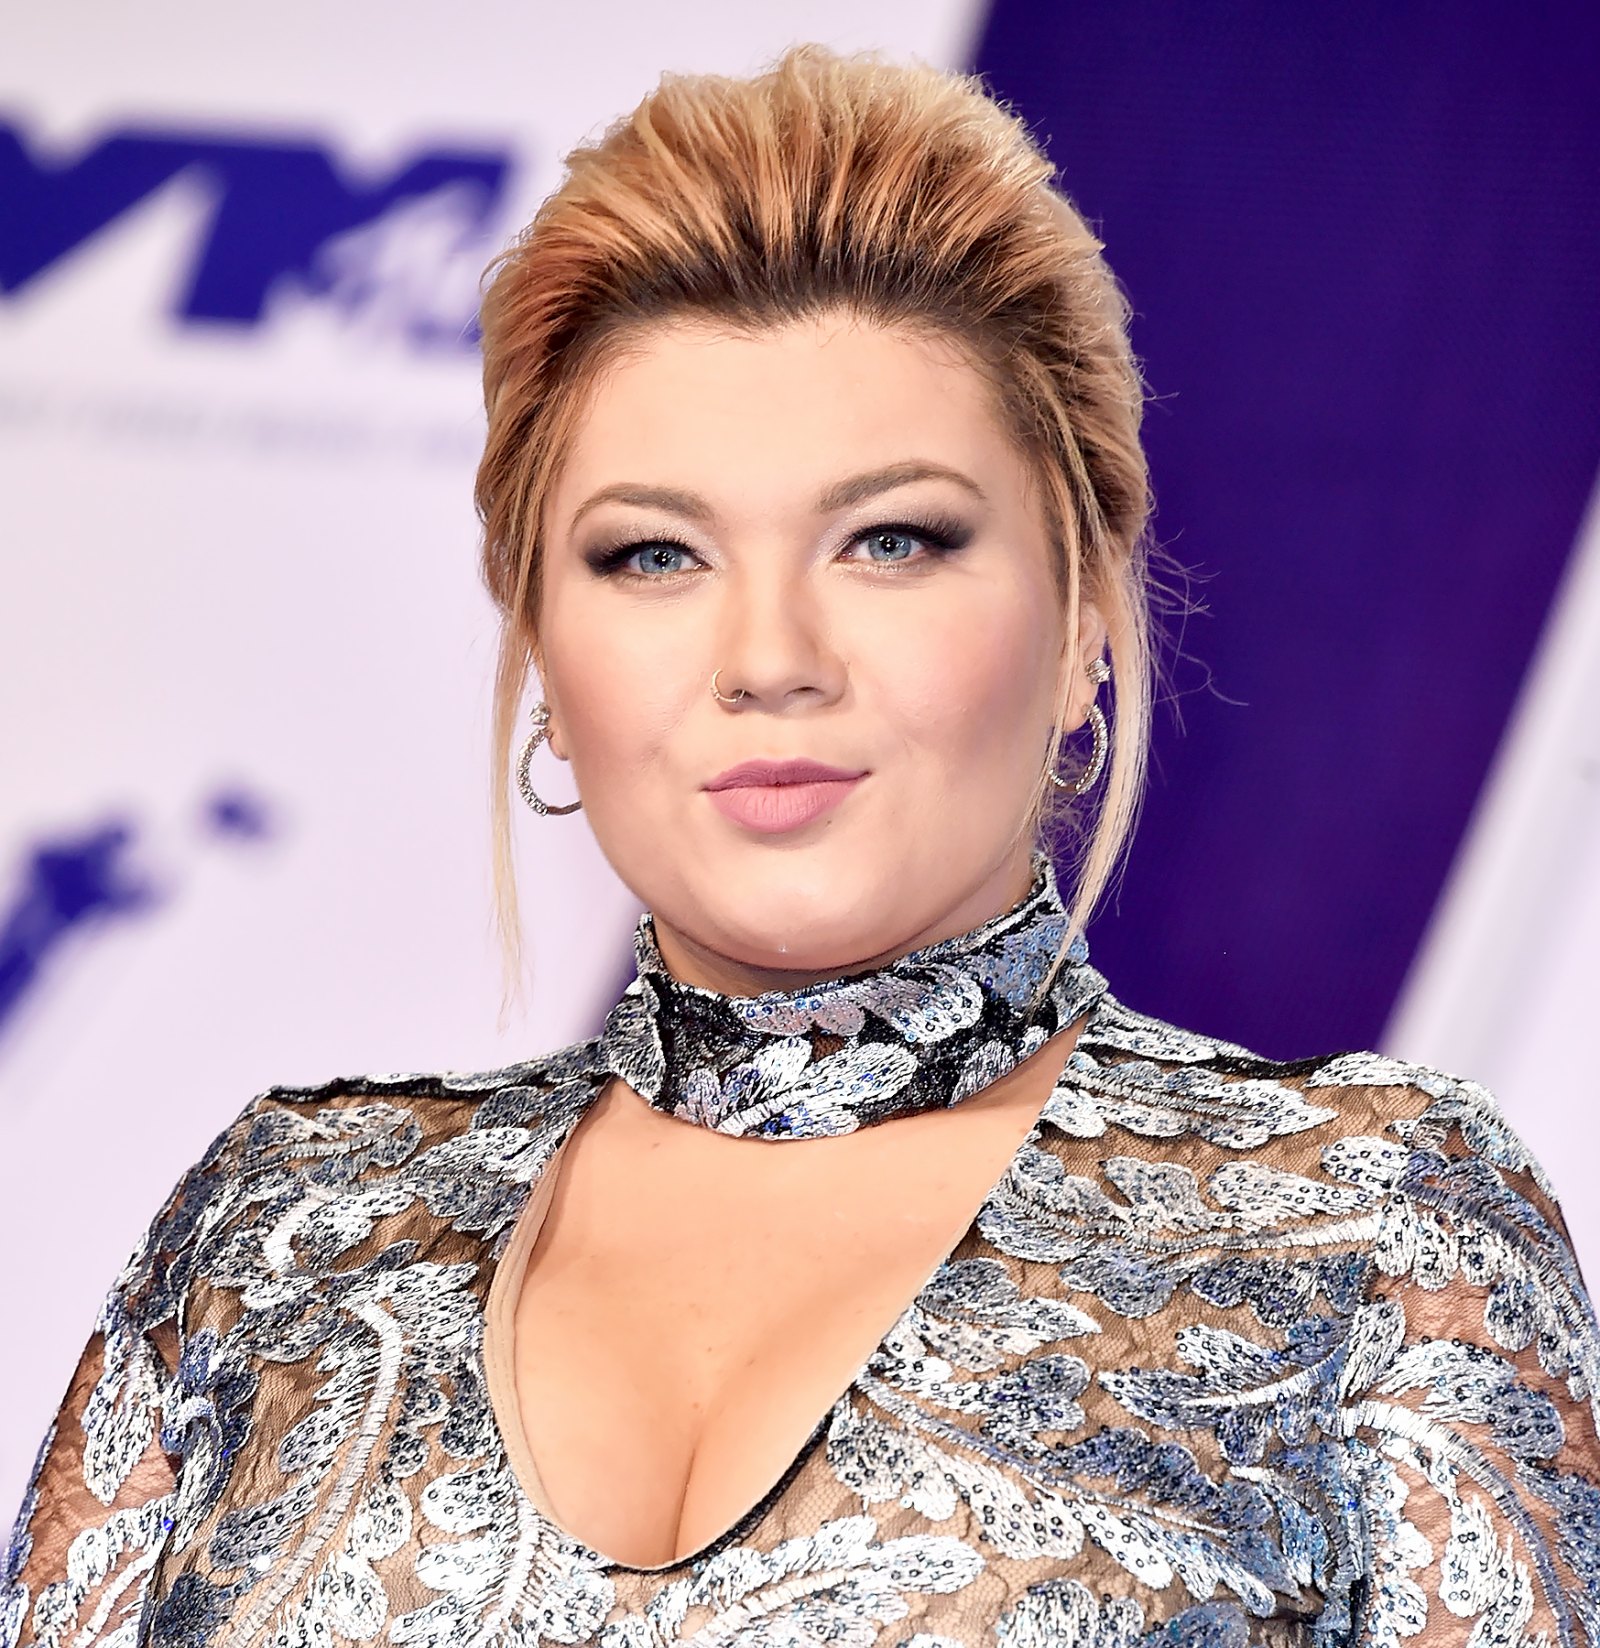 VMAs 2017: Amber Portwood Stunned in Nude-Illusion Dress